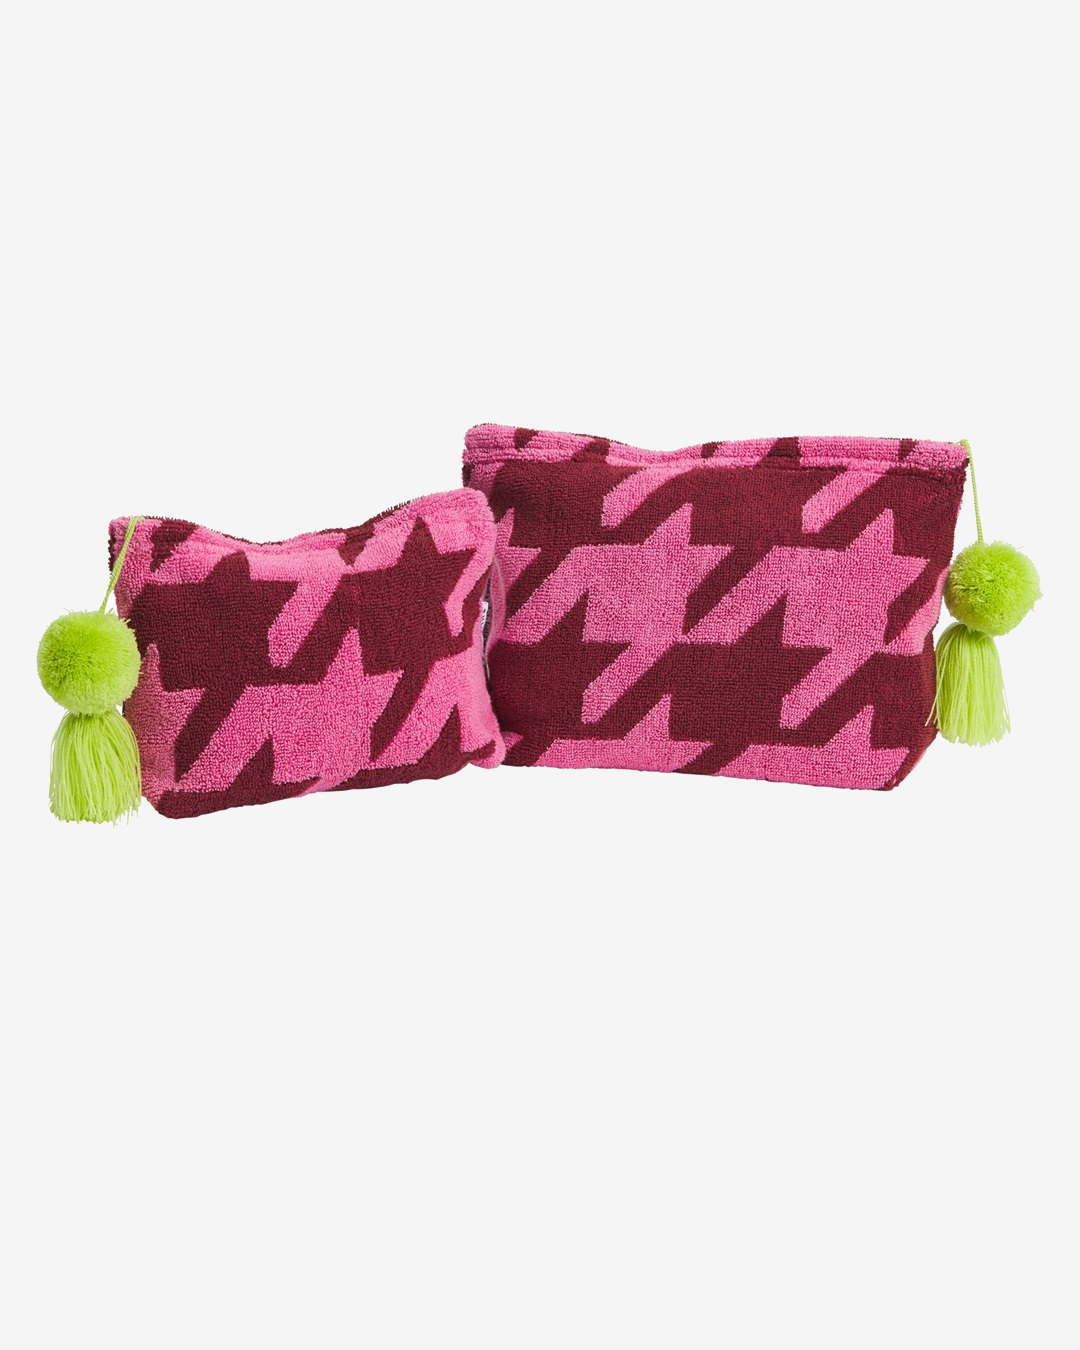 Pink pouches with green pom poms